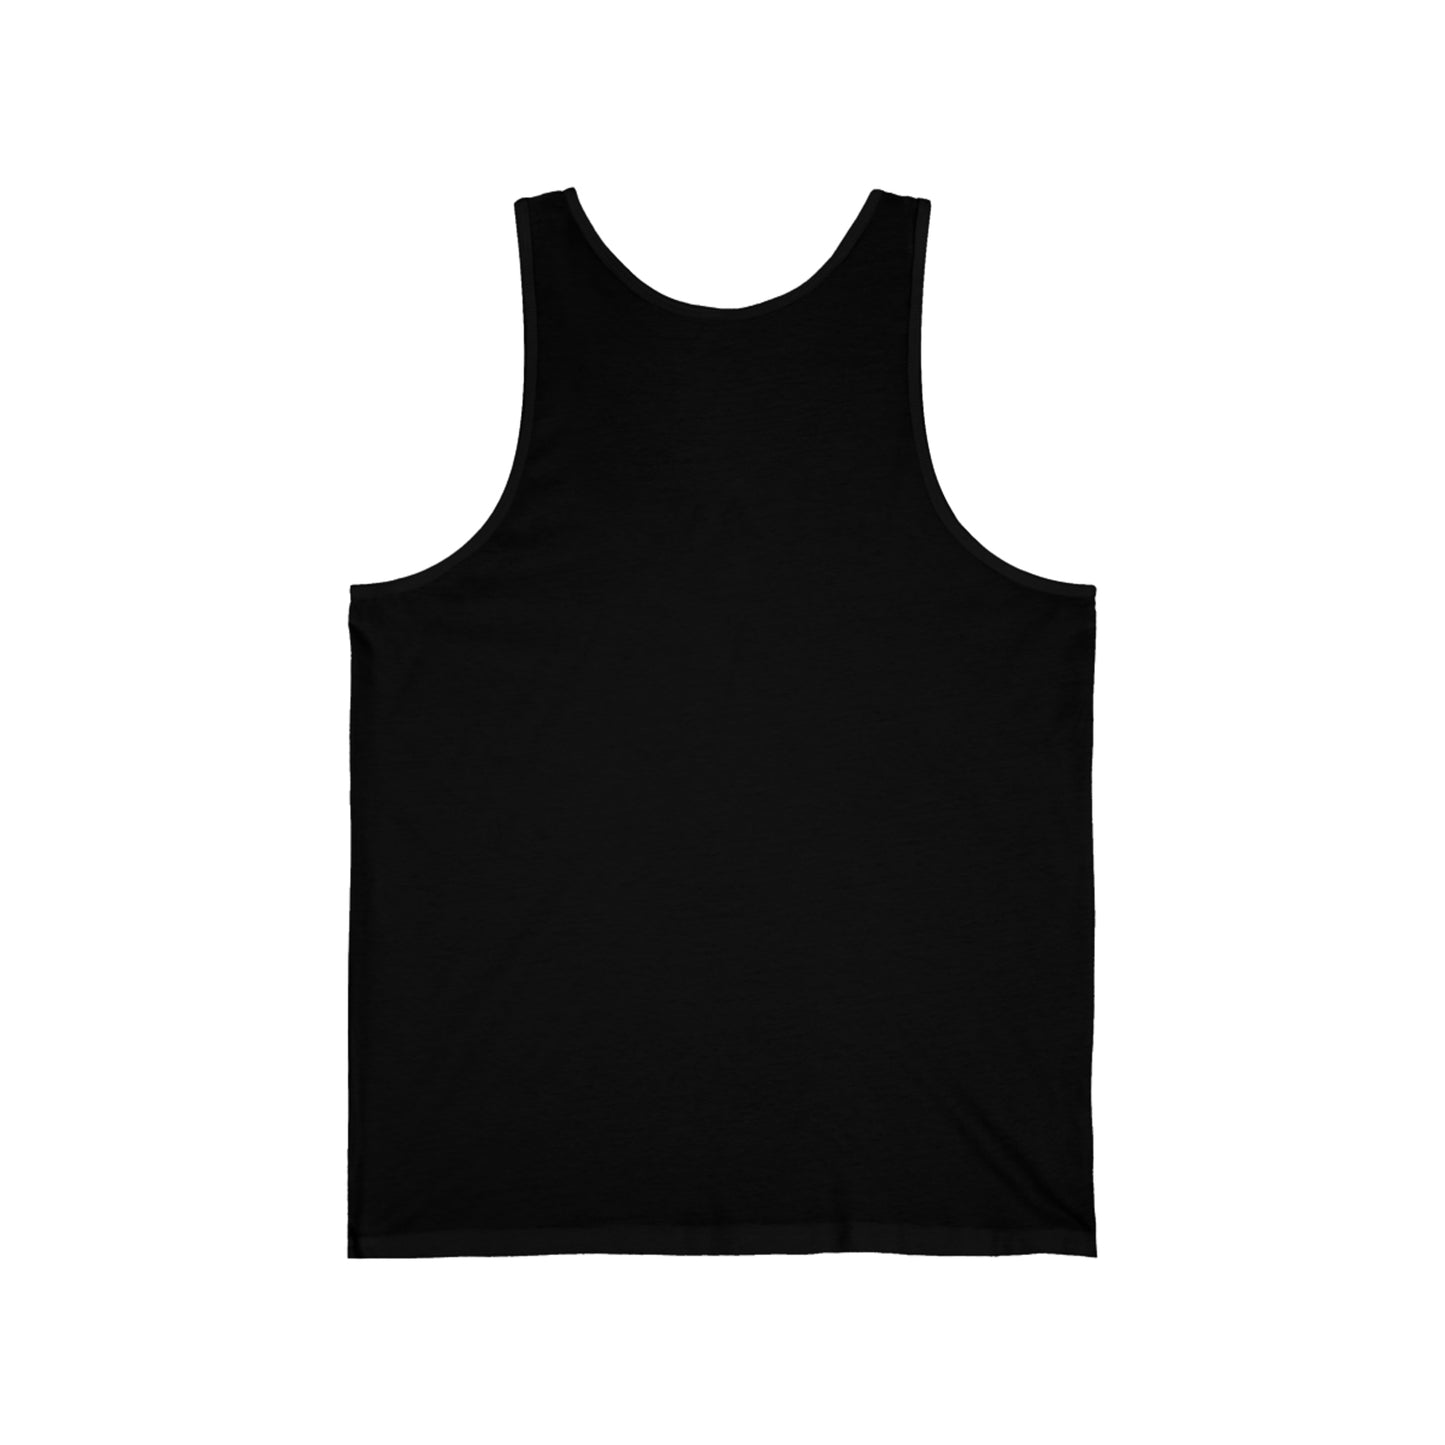 Mexican Roots Design 2: Tank Top